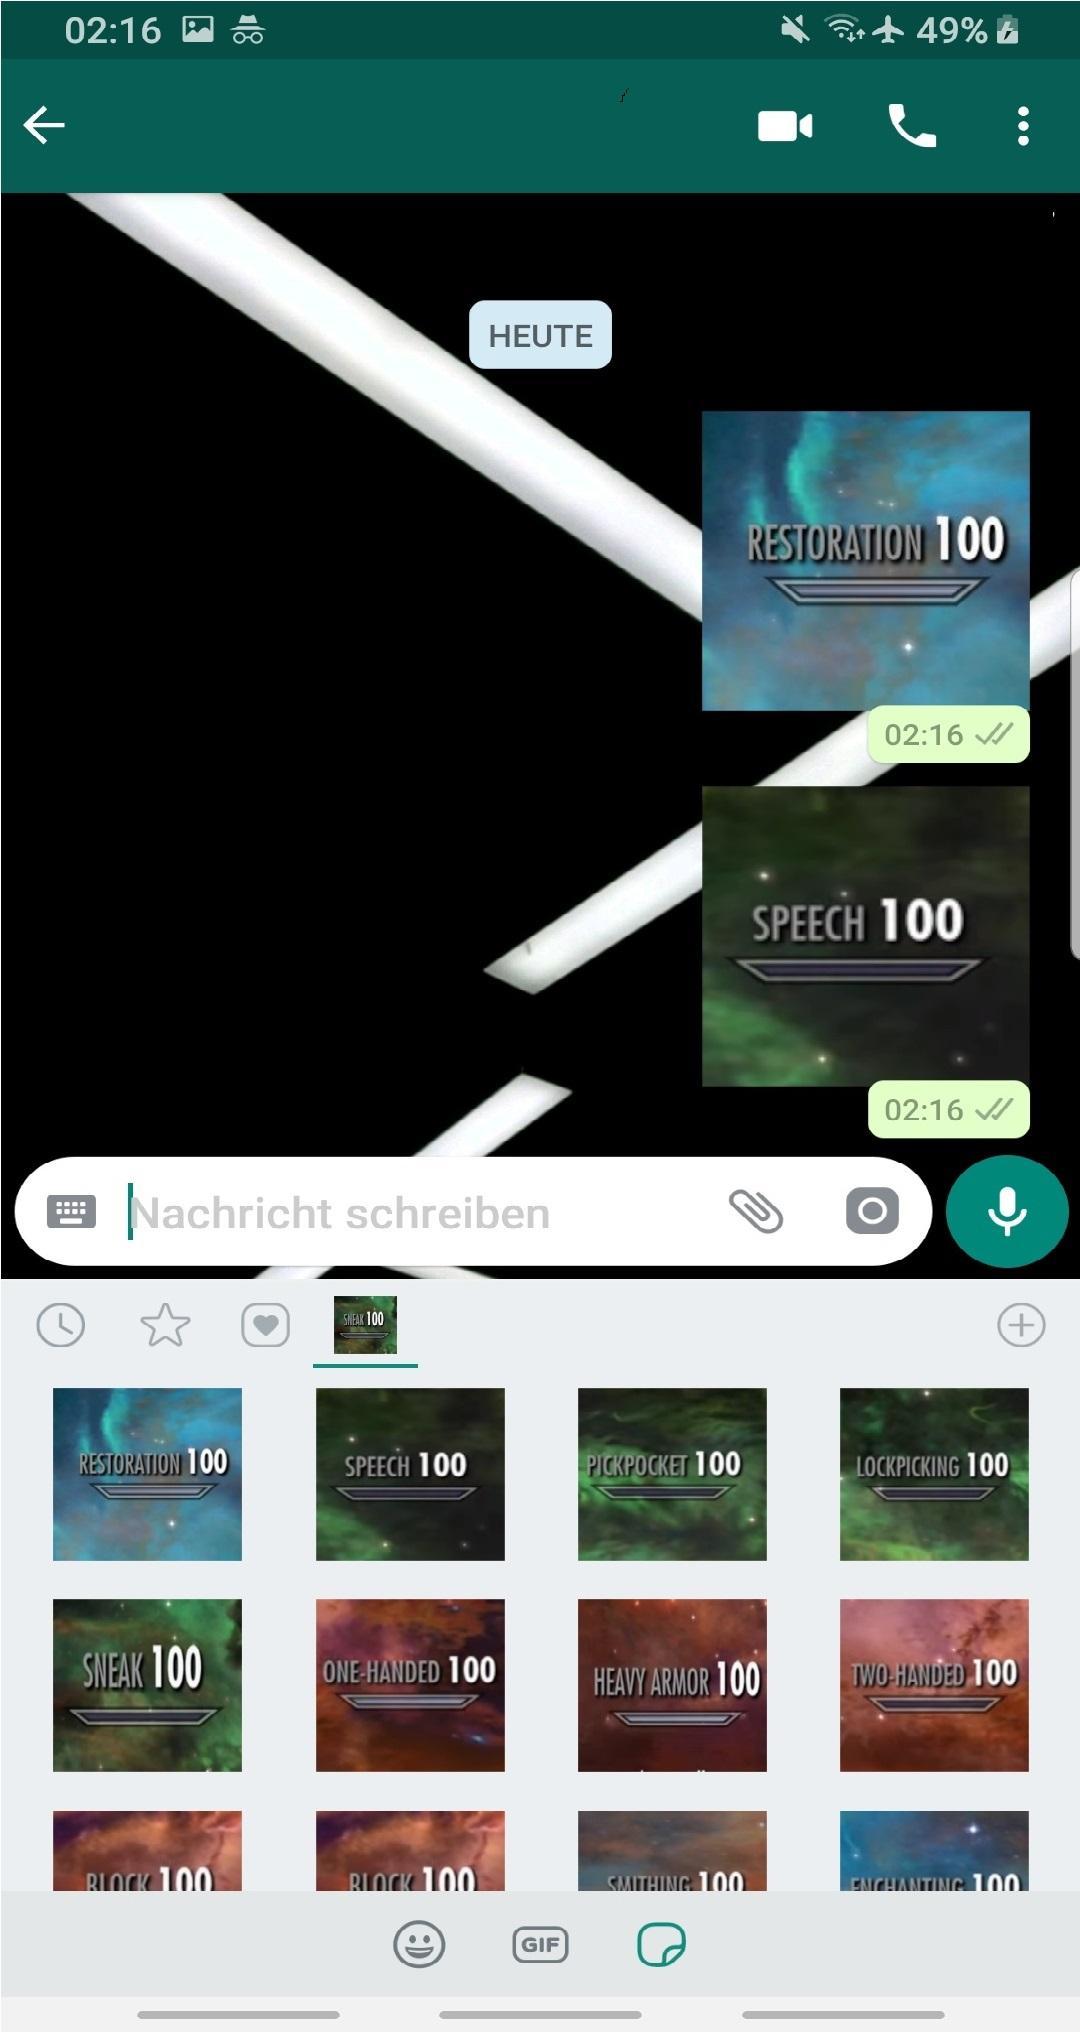 Skyrim Skill Points Wa Sticker Pack Dank Memes For Android Apk